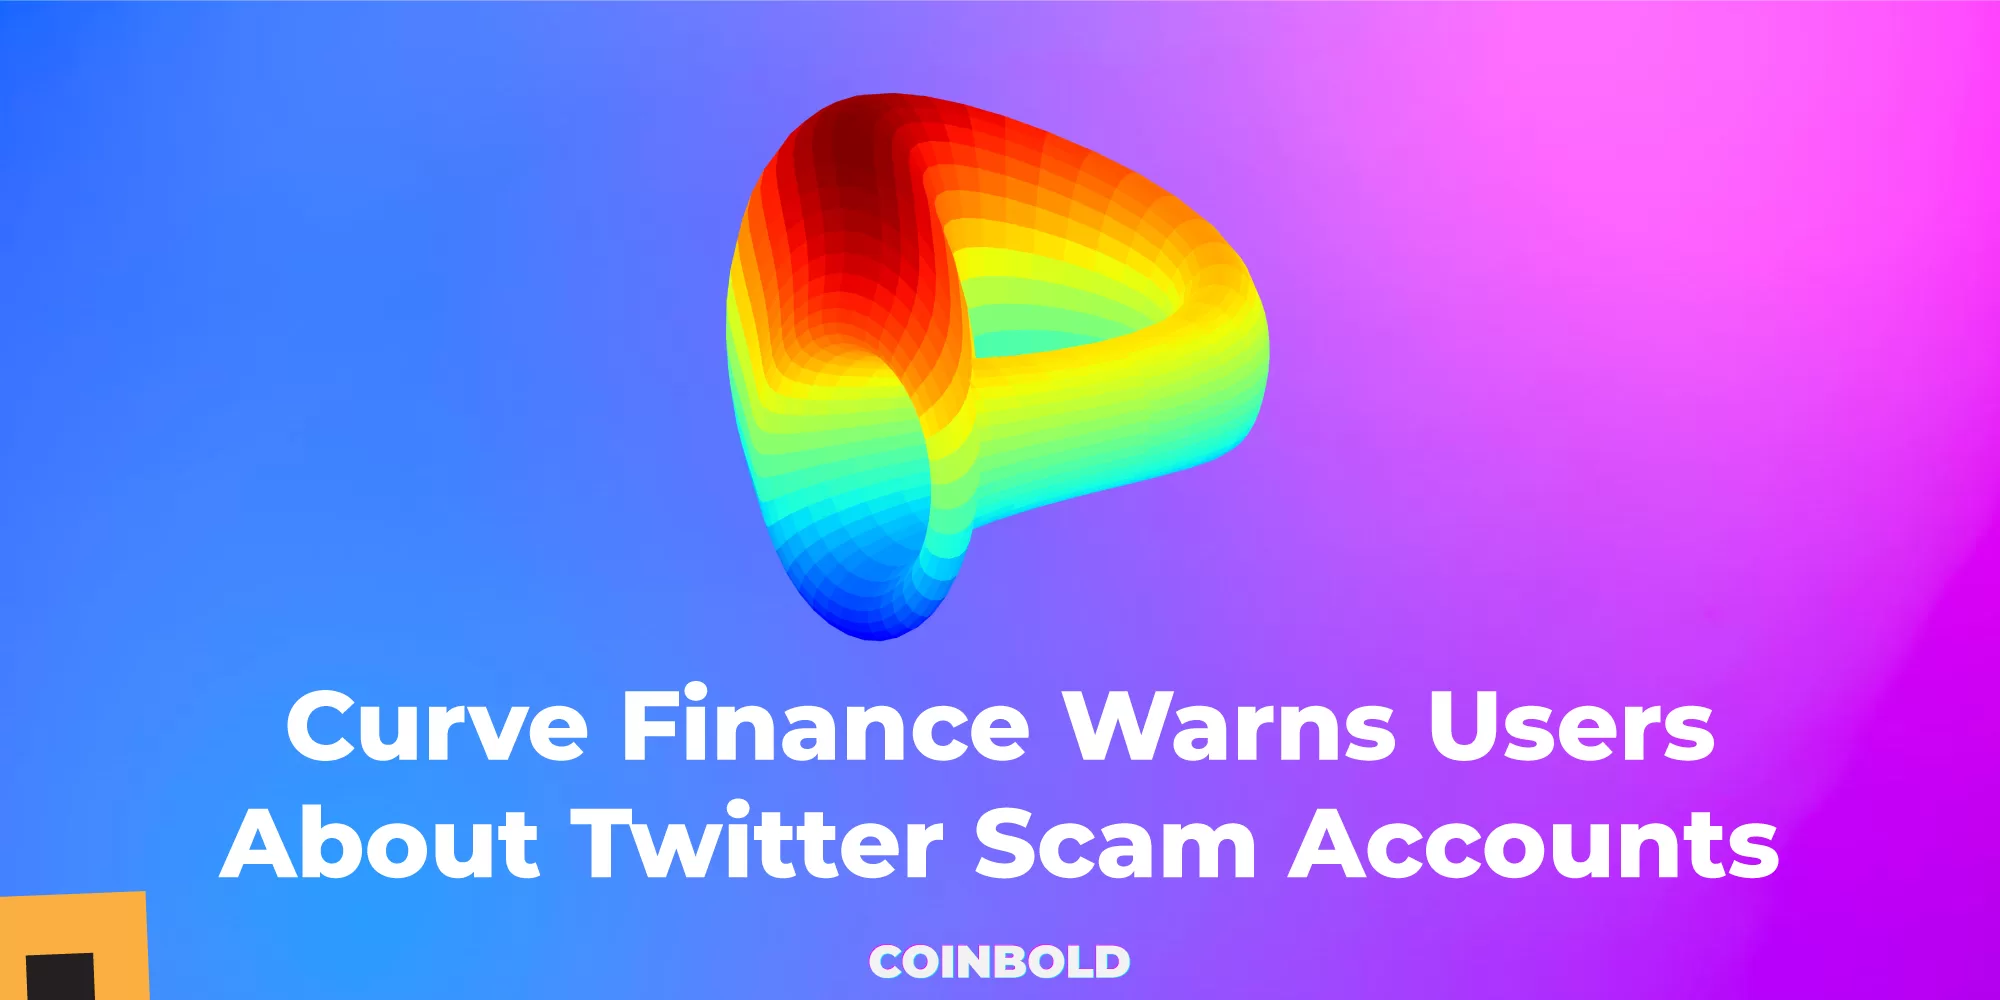 Curve Finance Warns Users About Twitter Scam Accounts